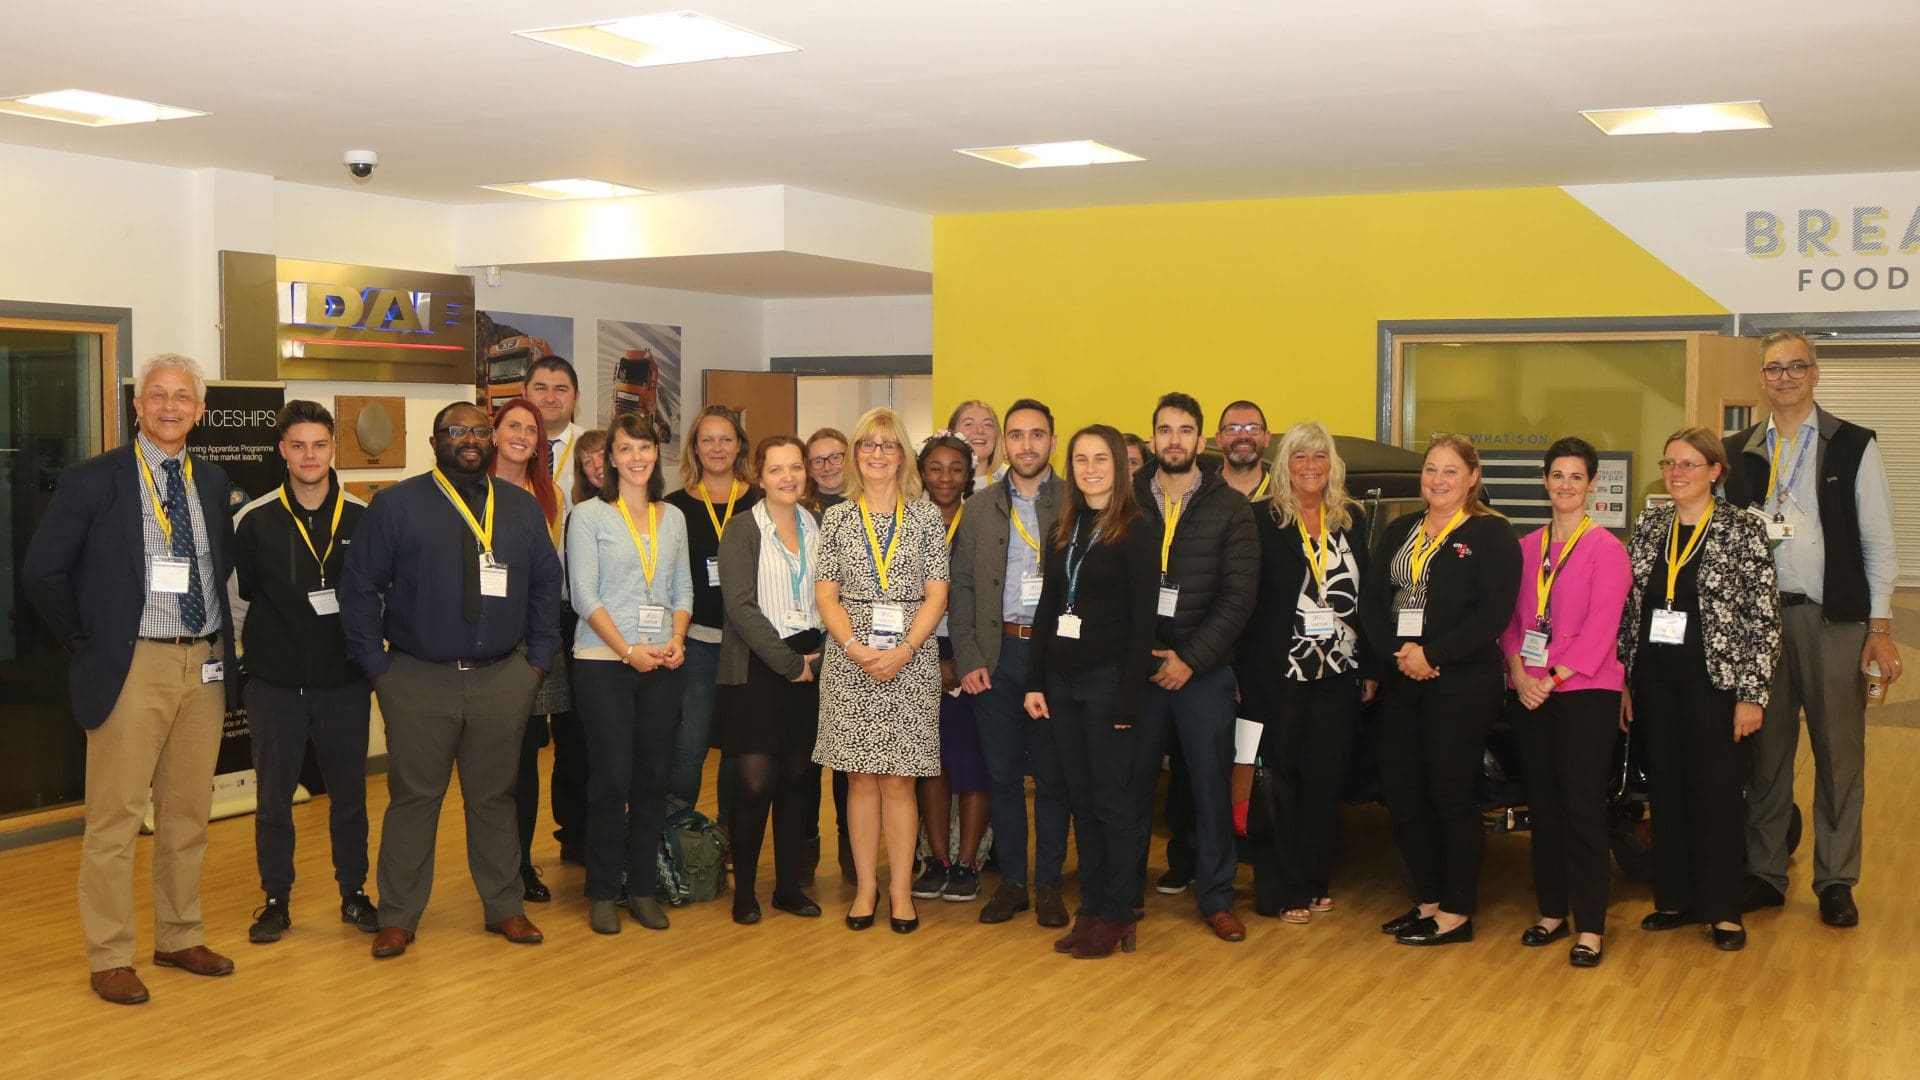 Group shot of staff members at careers event, Ambitions